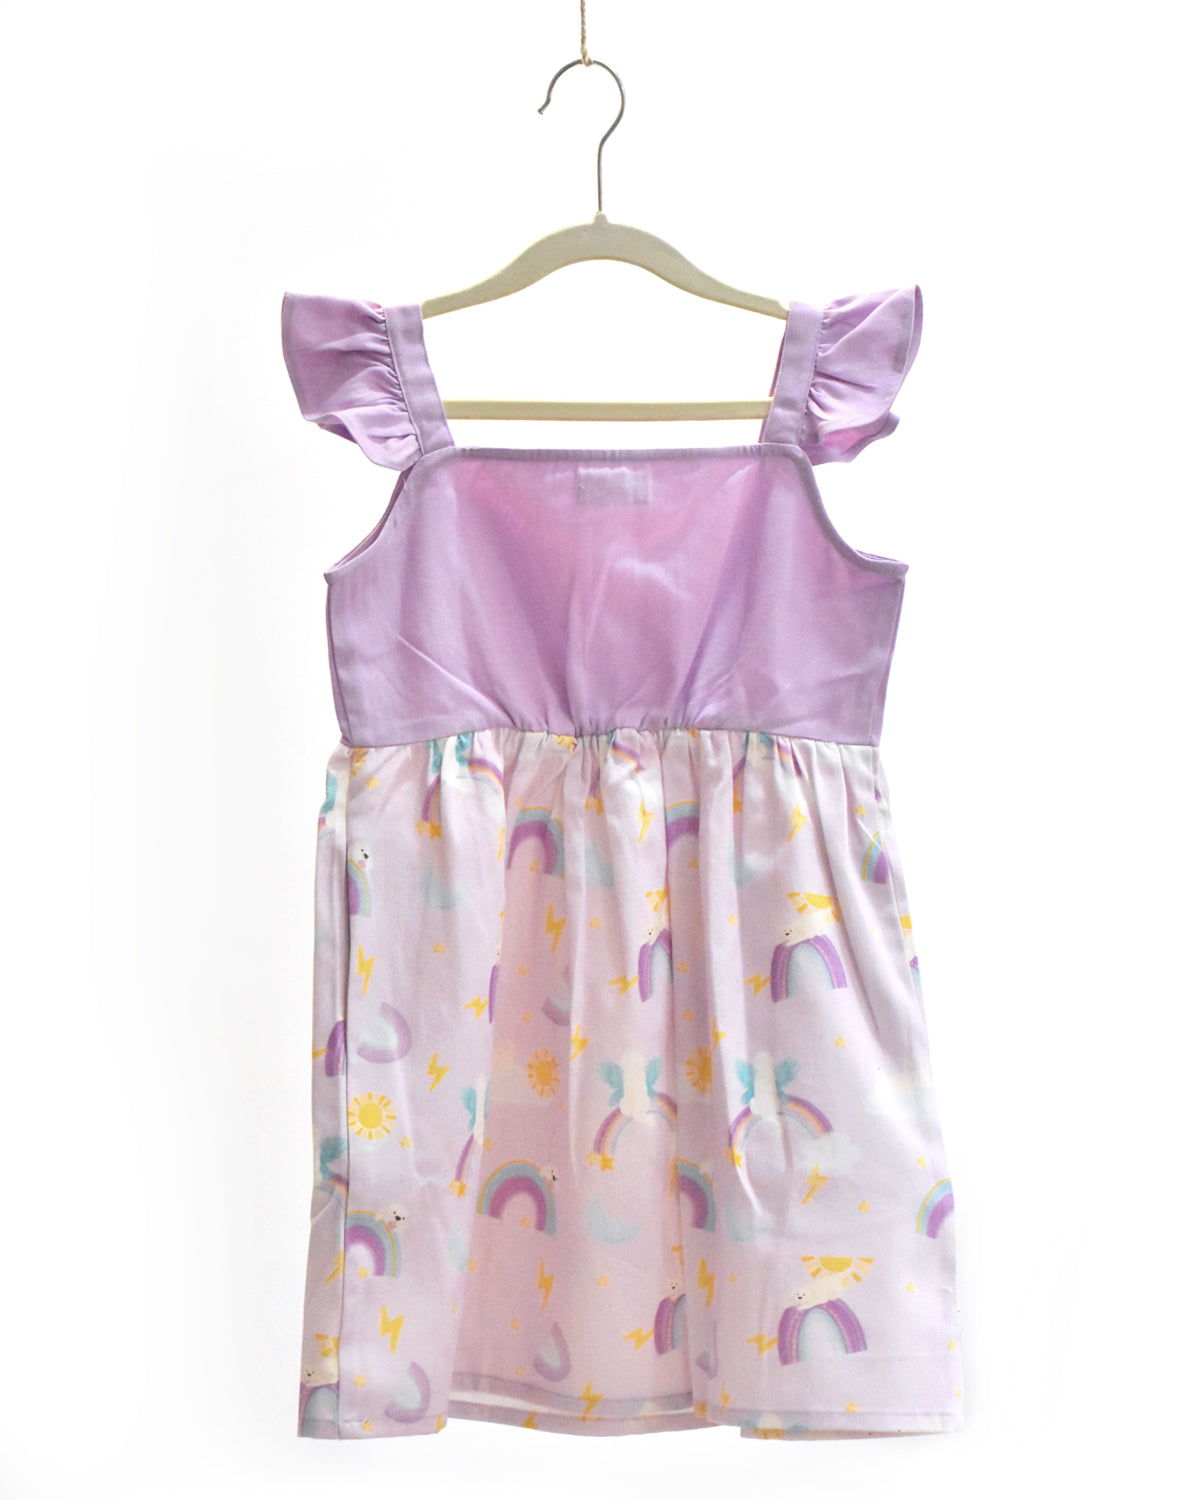 'In the Sky' Lavender Frilly Frock